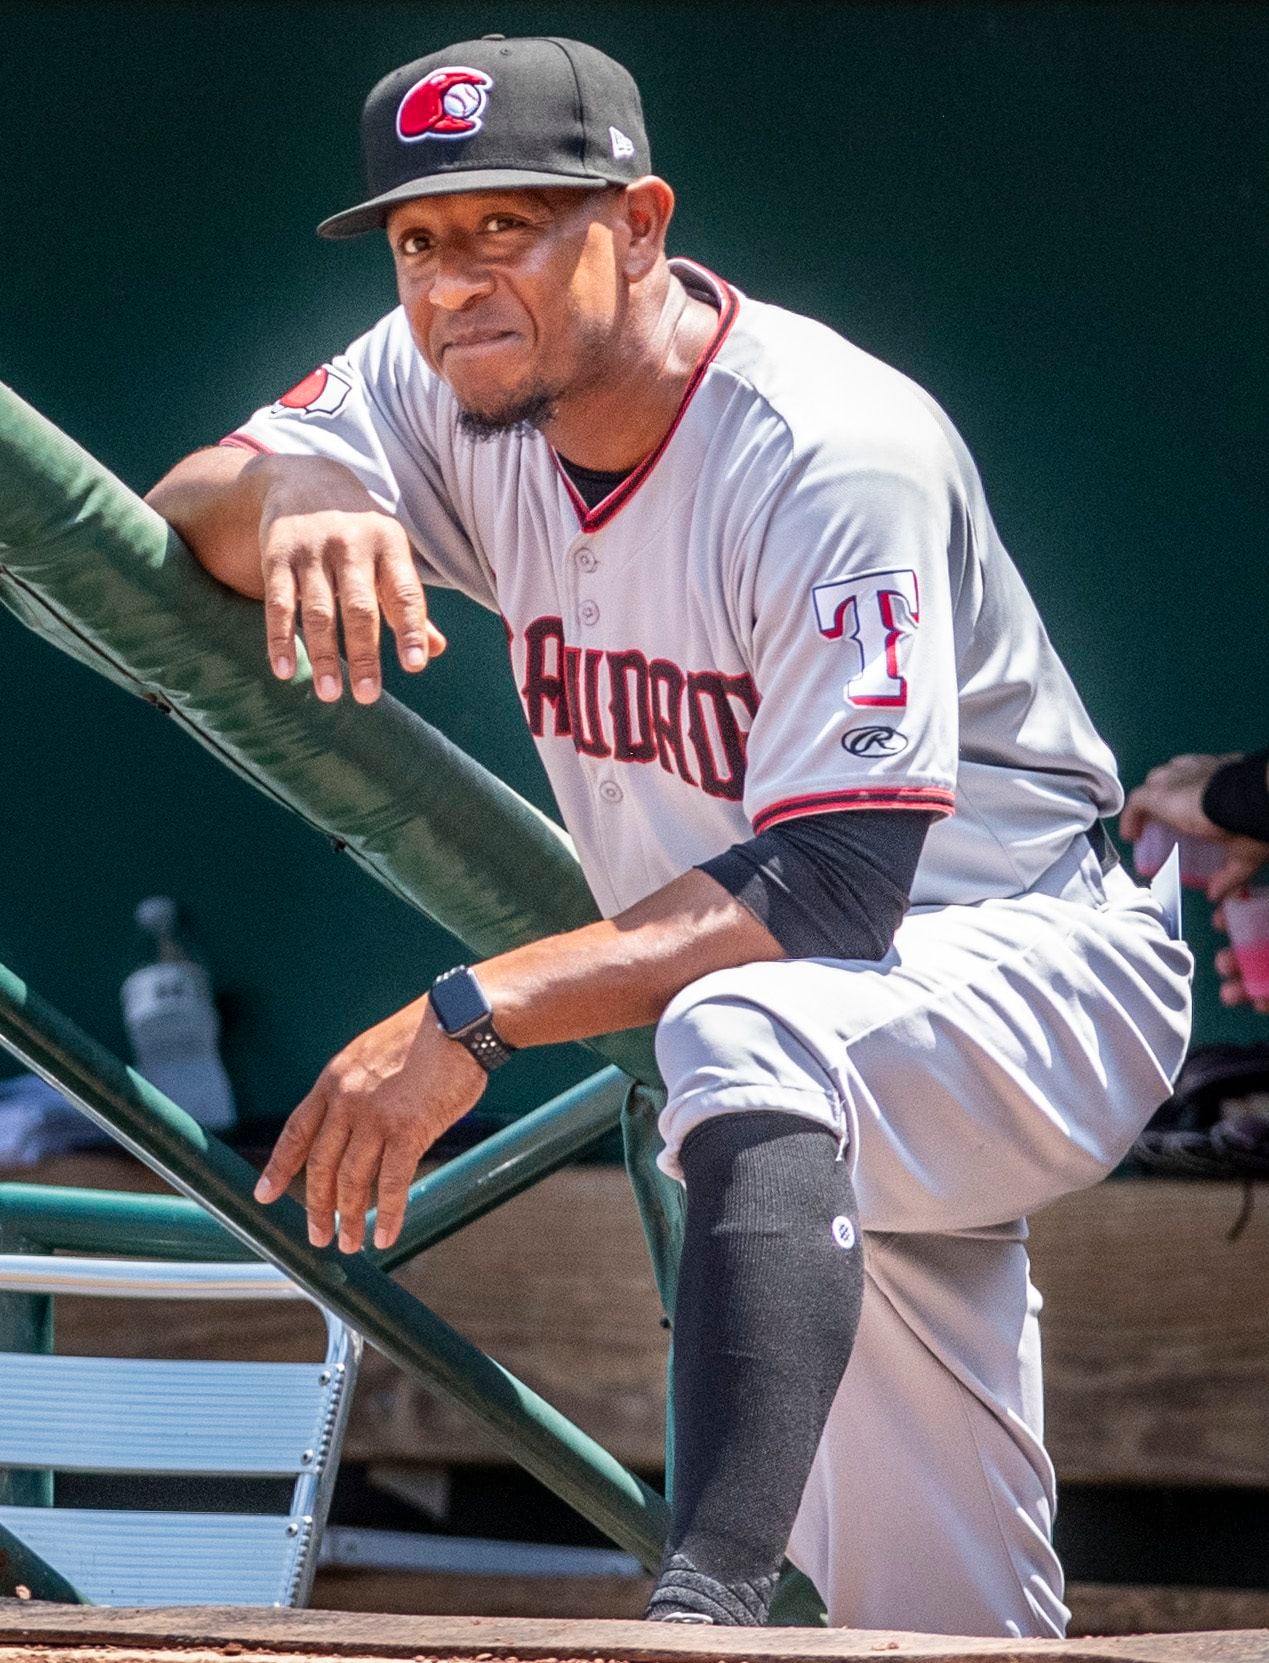 Hickory Crawdad manager Josh Johnson before the game with the Greensboro Grasshoppers at First National Bank Field on Sunday, August 8, 2021 in Greensboro, N.C.